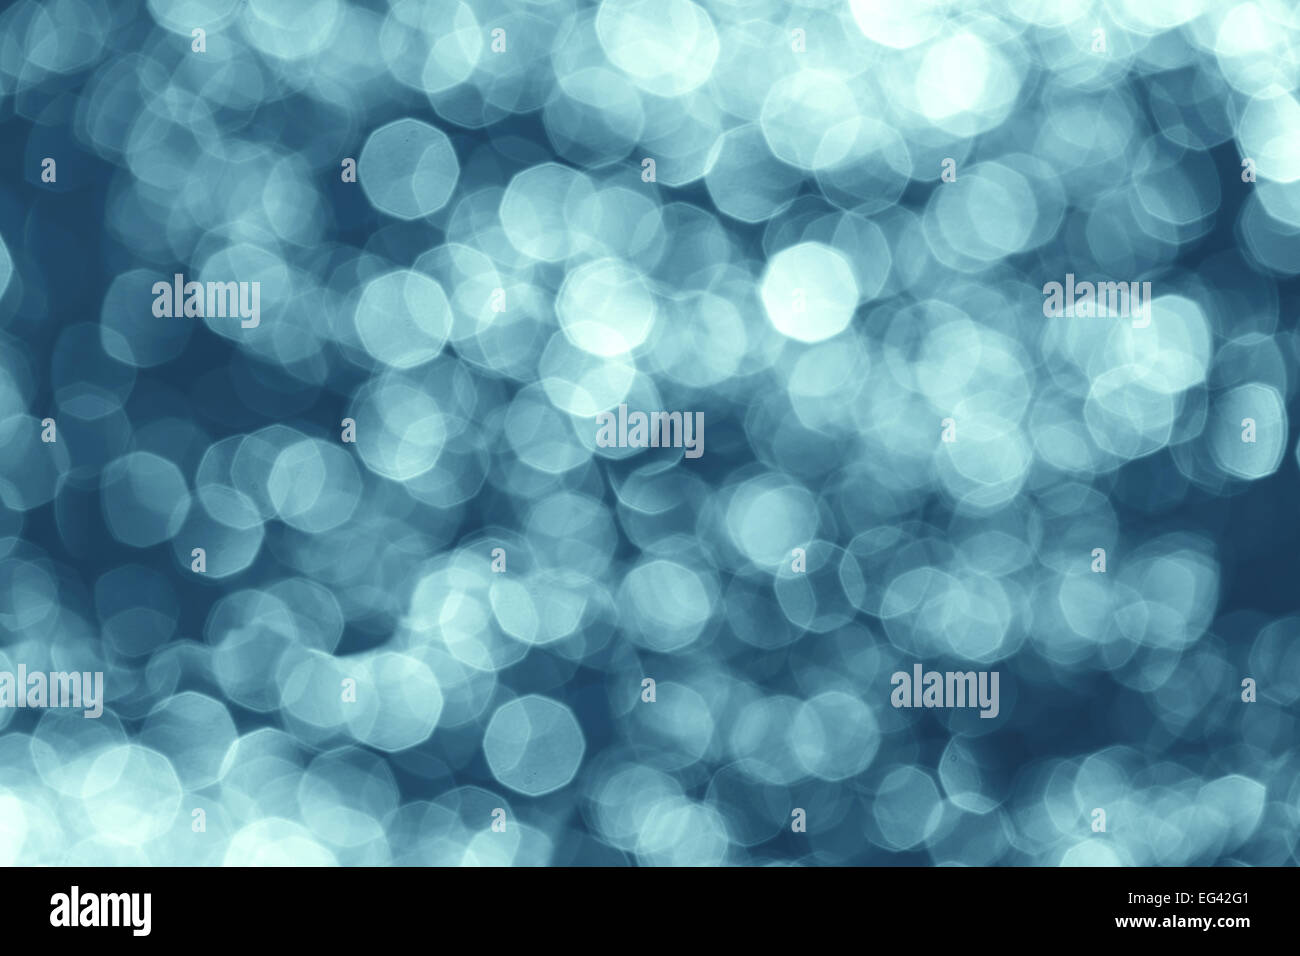 Abstract background made of water reflection bokeh circles. Stock Photo